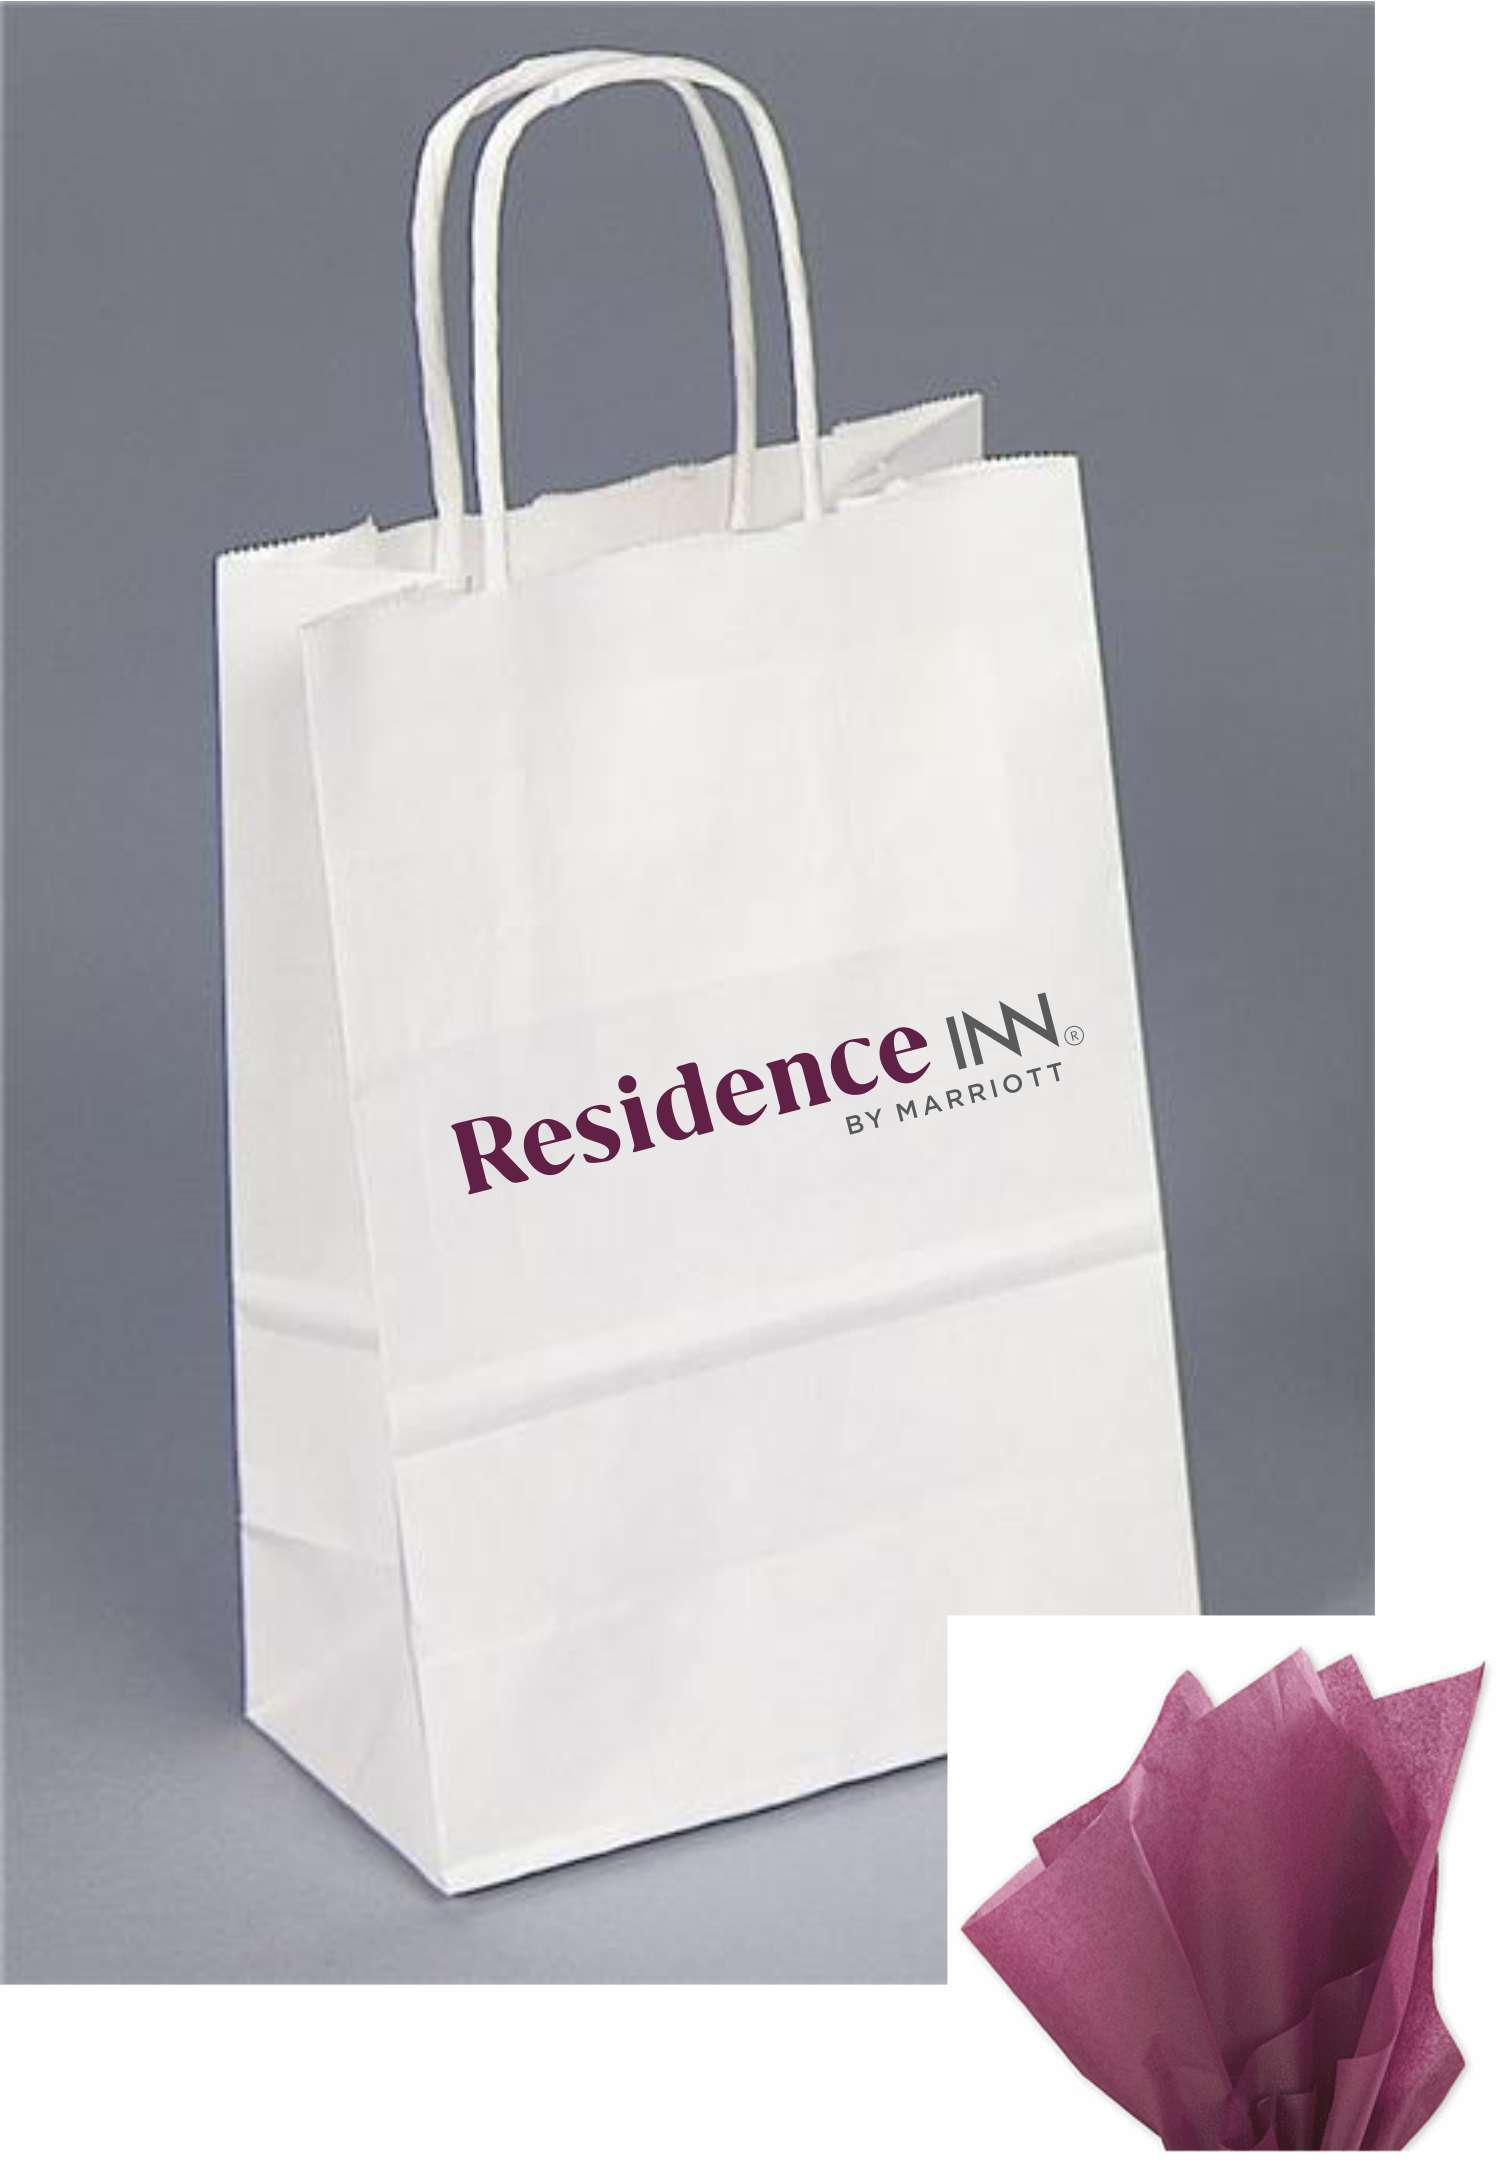 Full 2-color Residence Inn label - Perfect for guests, clients and the breakfast bar!